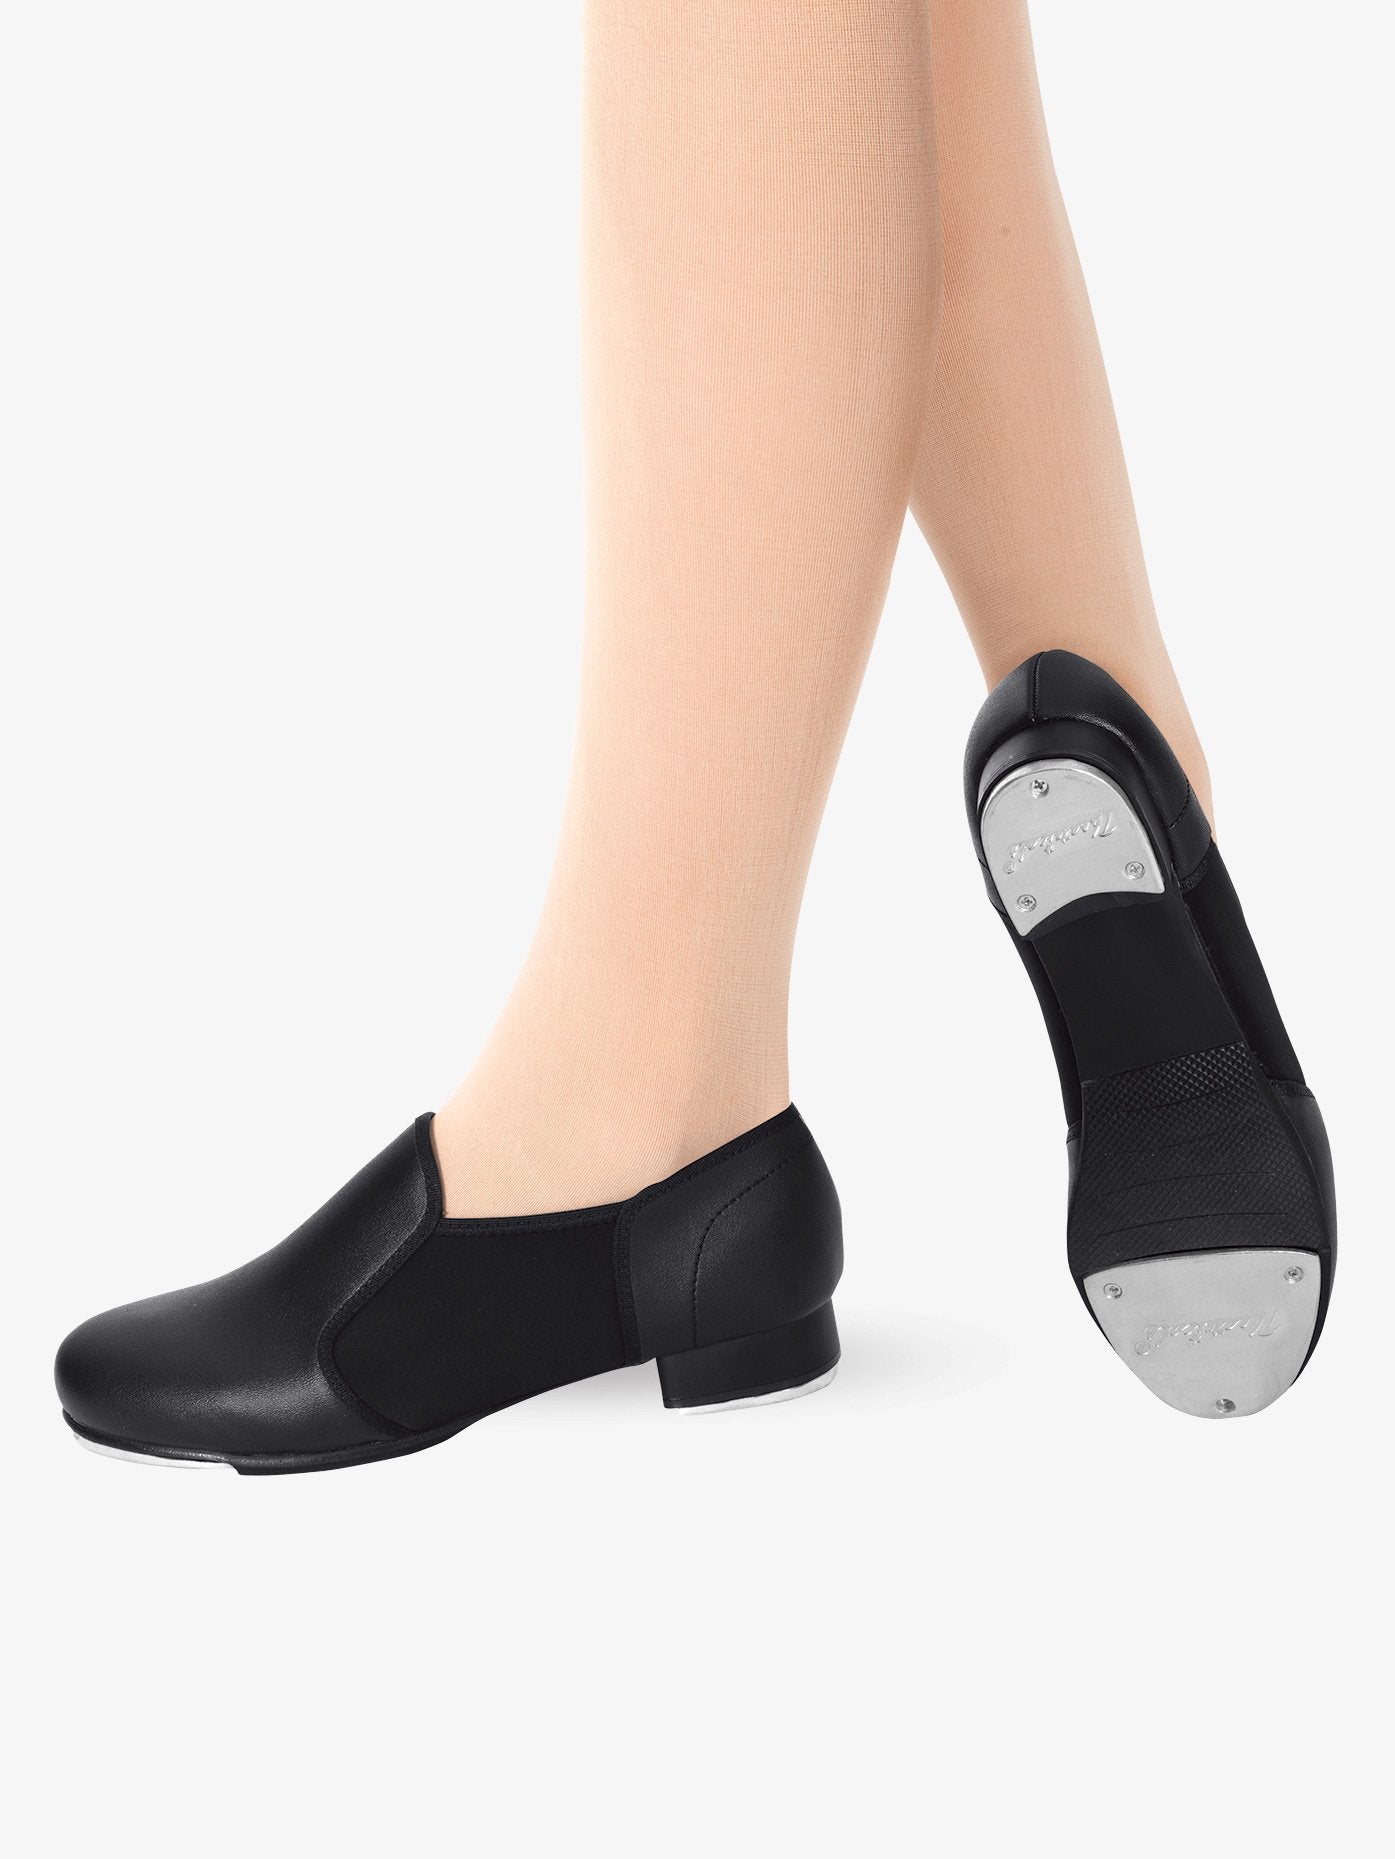 Theatricals Adult Slip-on Black Tap Shoes